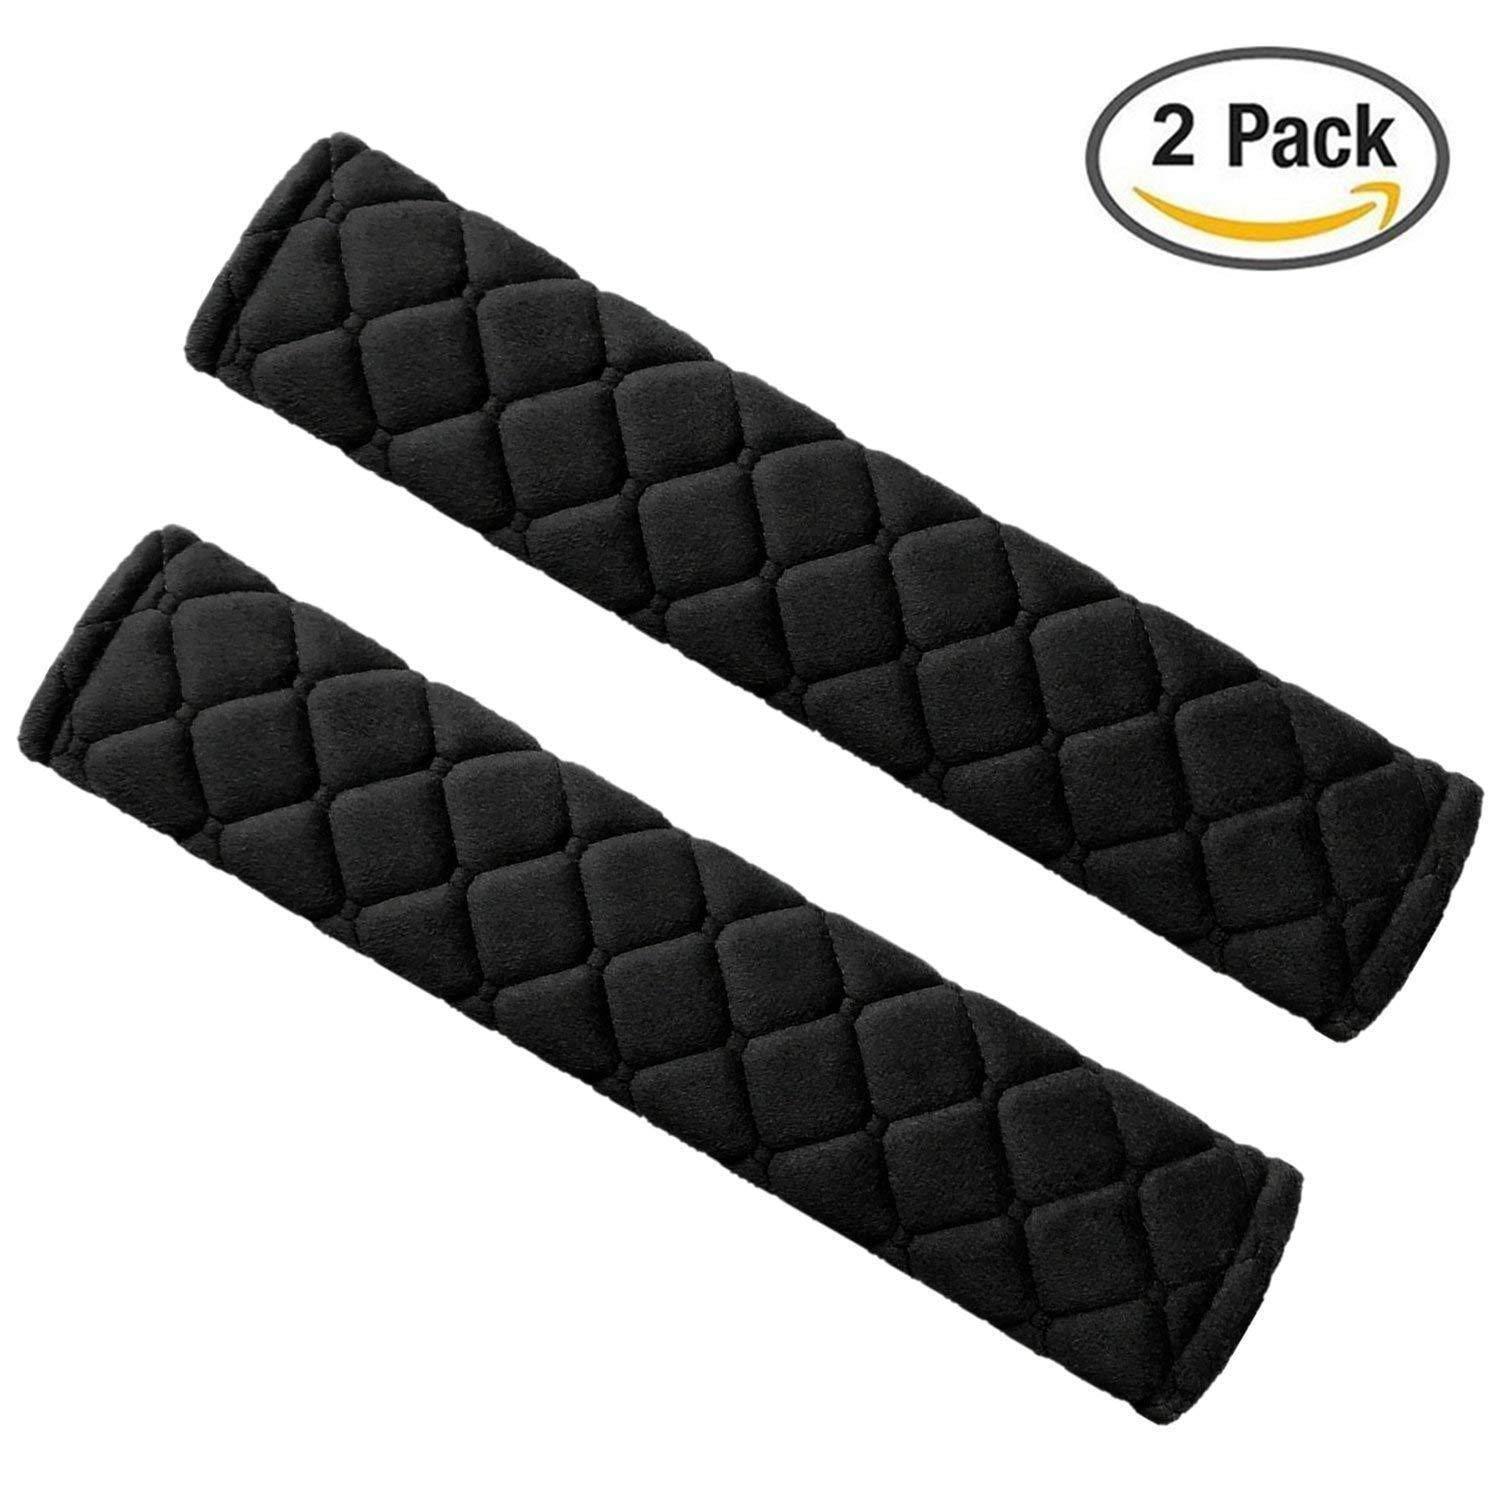 2pcs Car Seat Belt Protection Covers Auto Safety Shoulder Strap Protection Pad Cushion Cover Pads for Ford Fusion